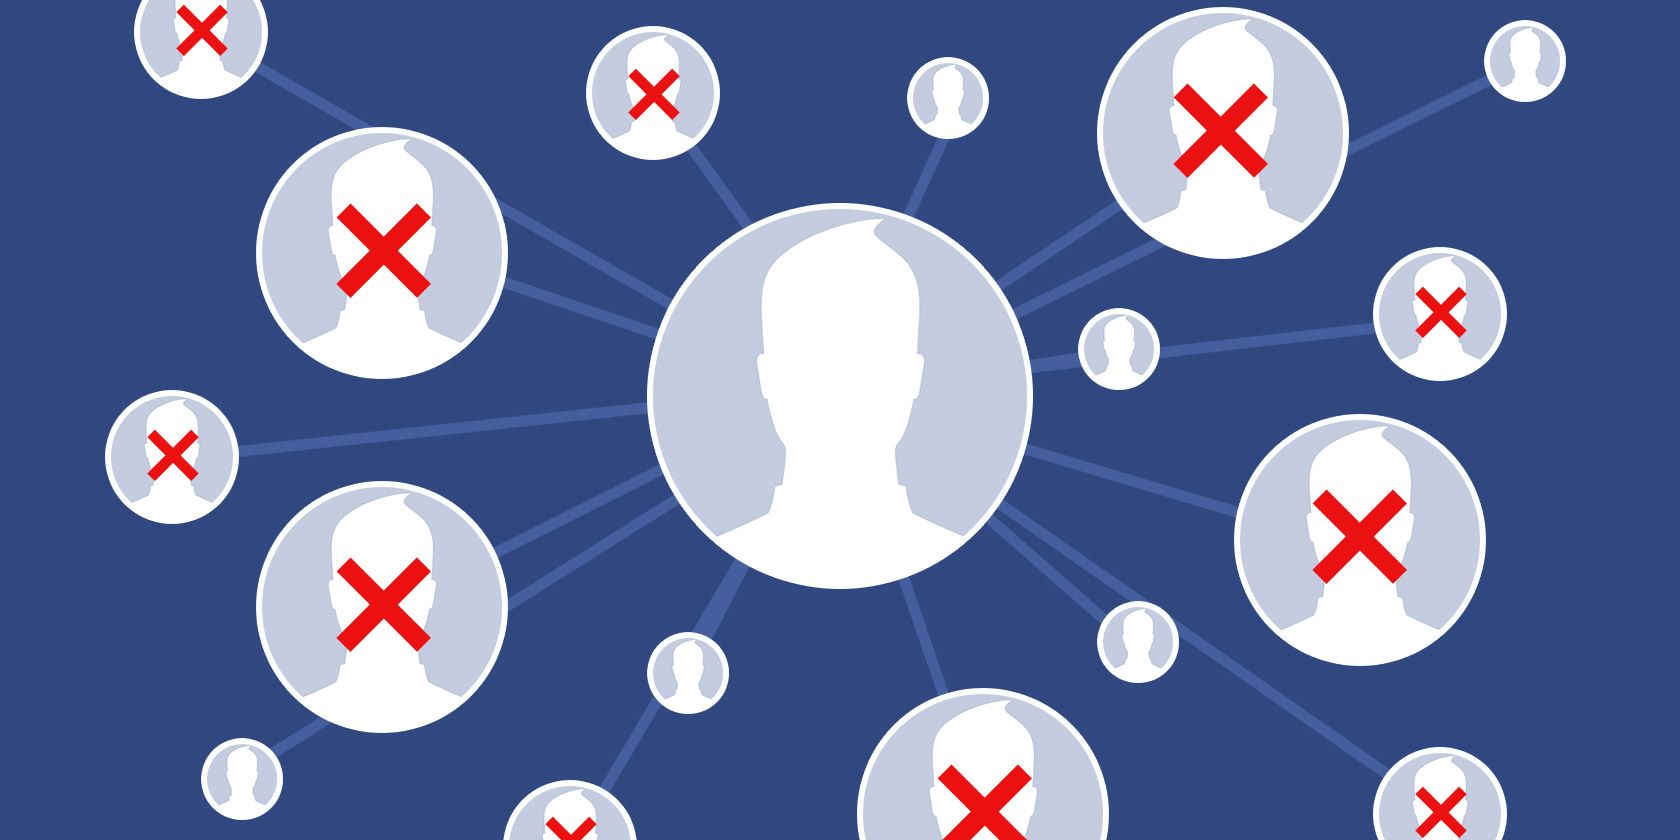 5 Reasons to Start Deleting Your Facebook Friends